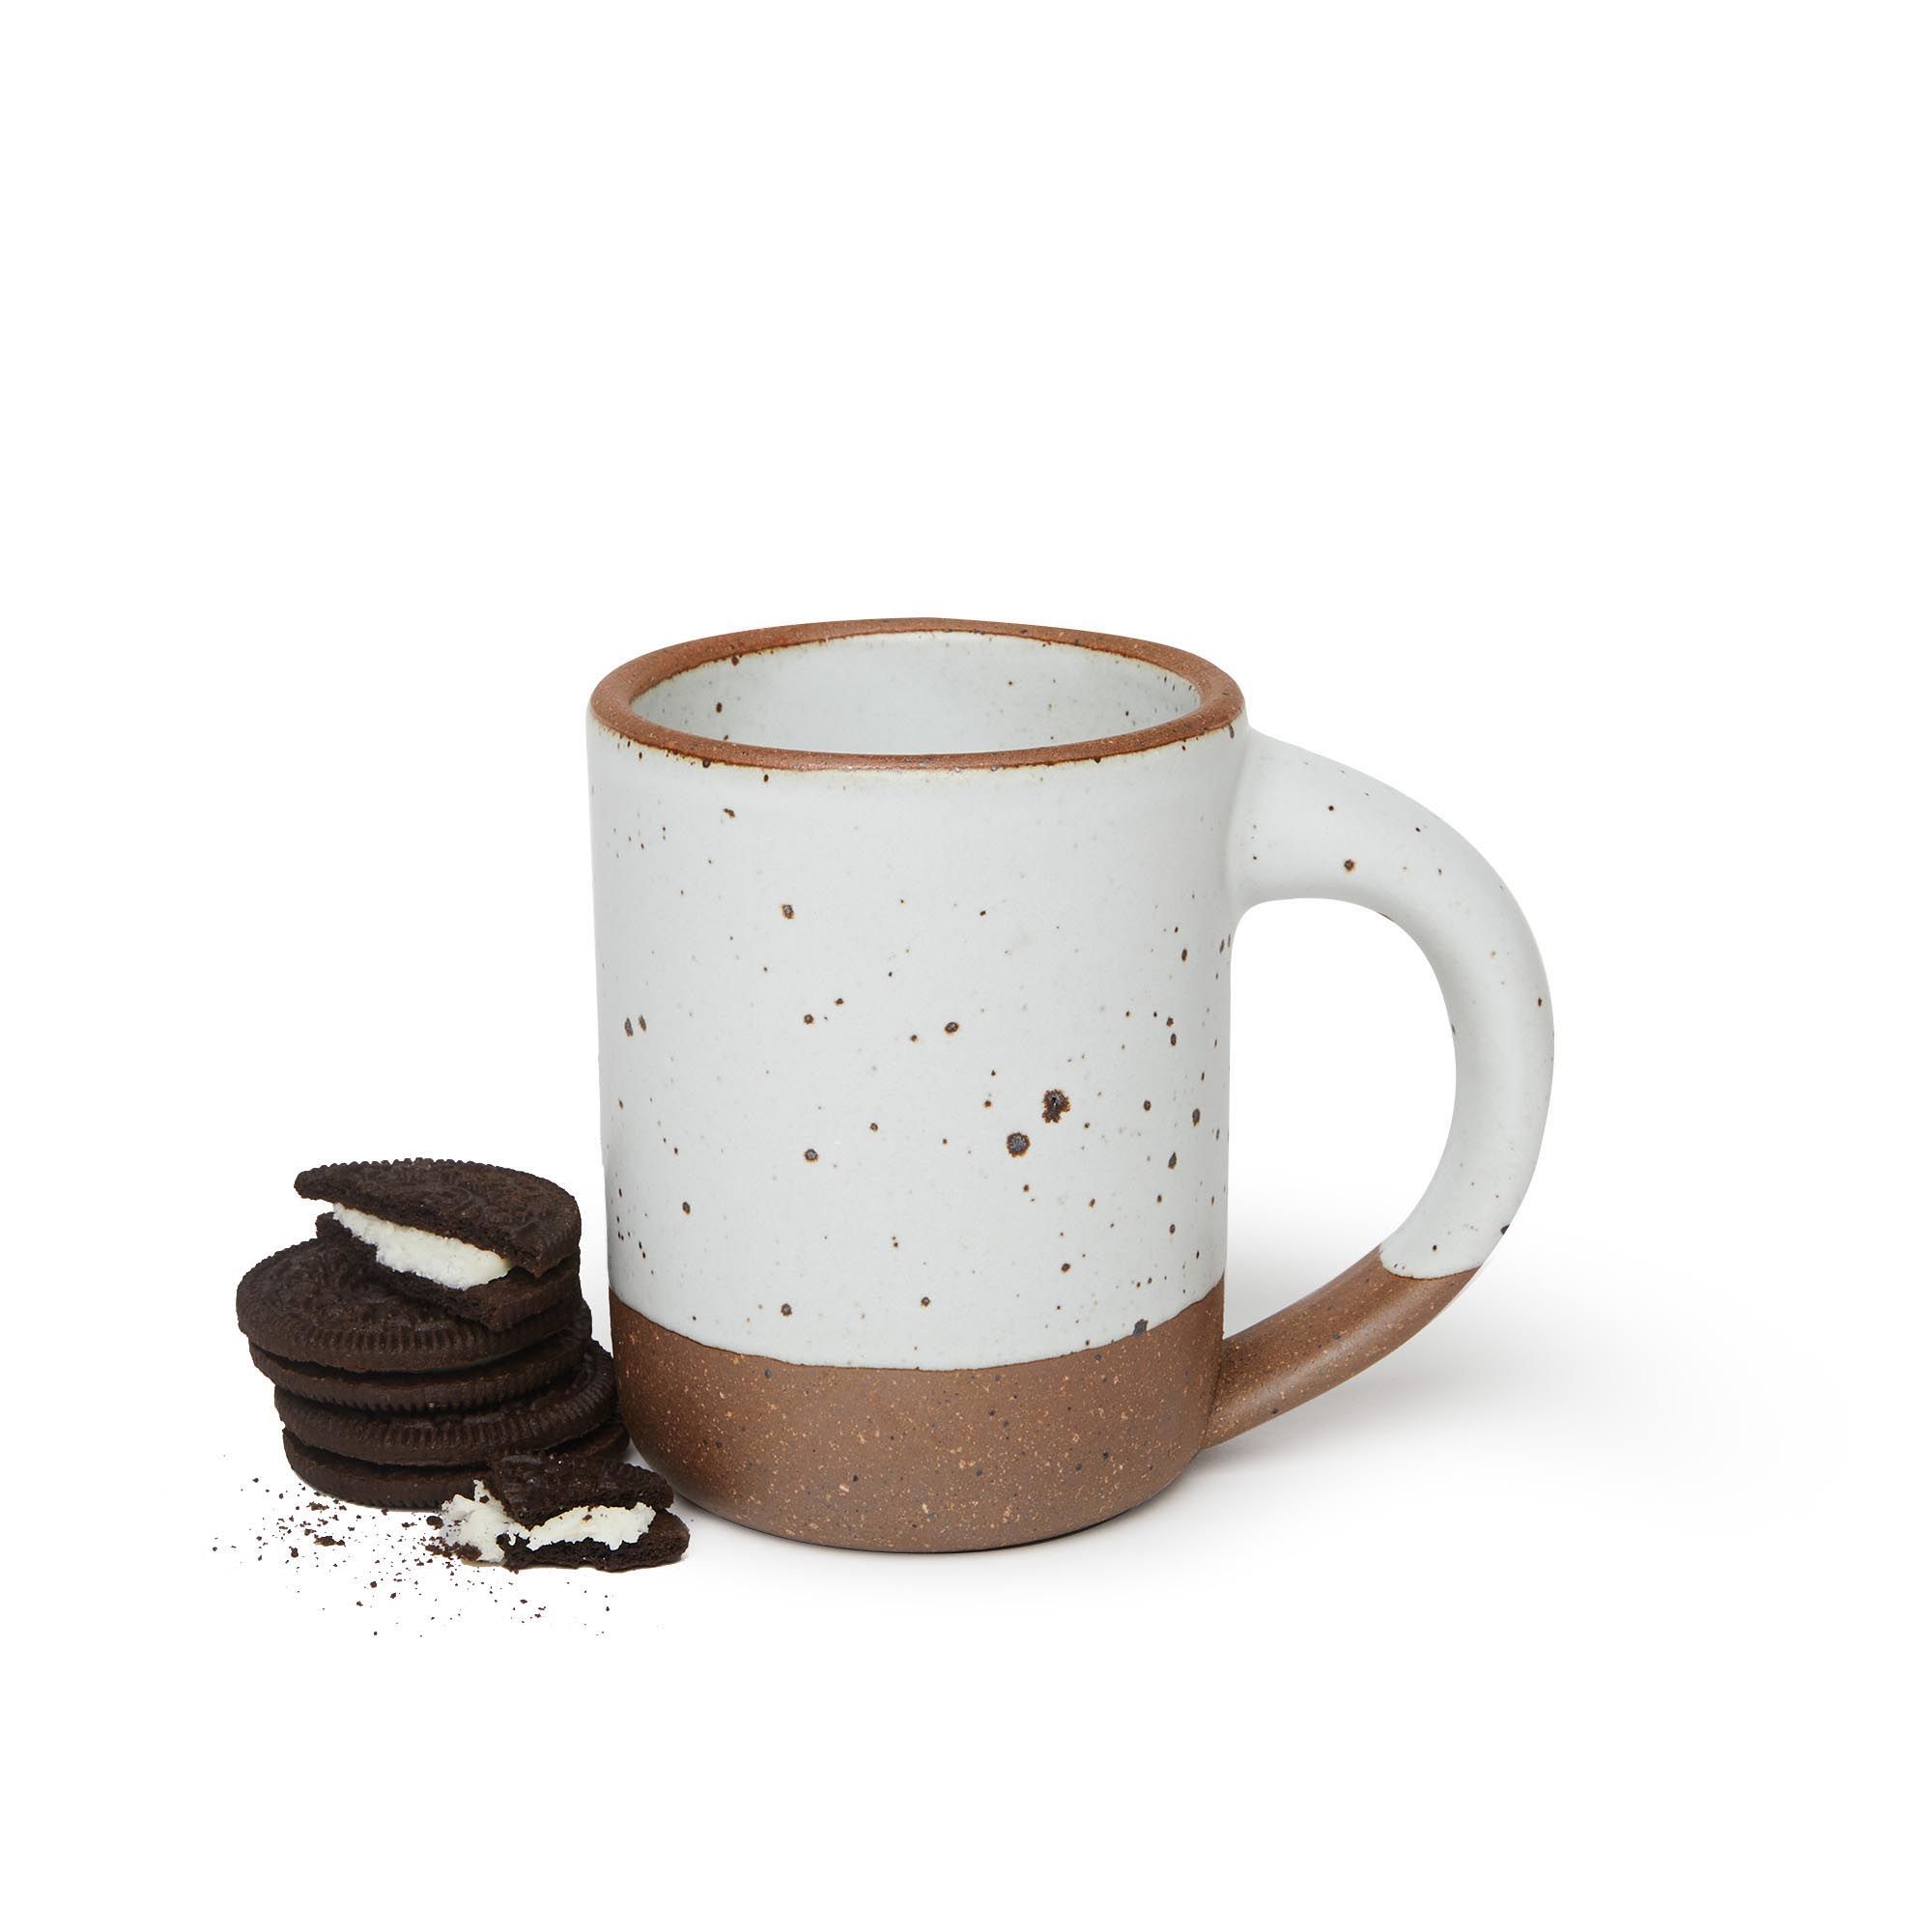 Truly, a perfectly sized and shaped mug. With a stack of cookies next to it.